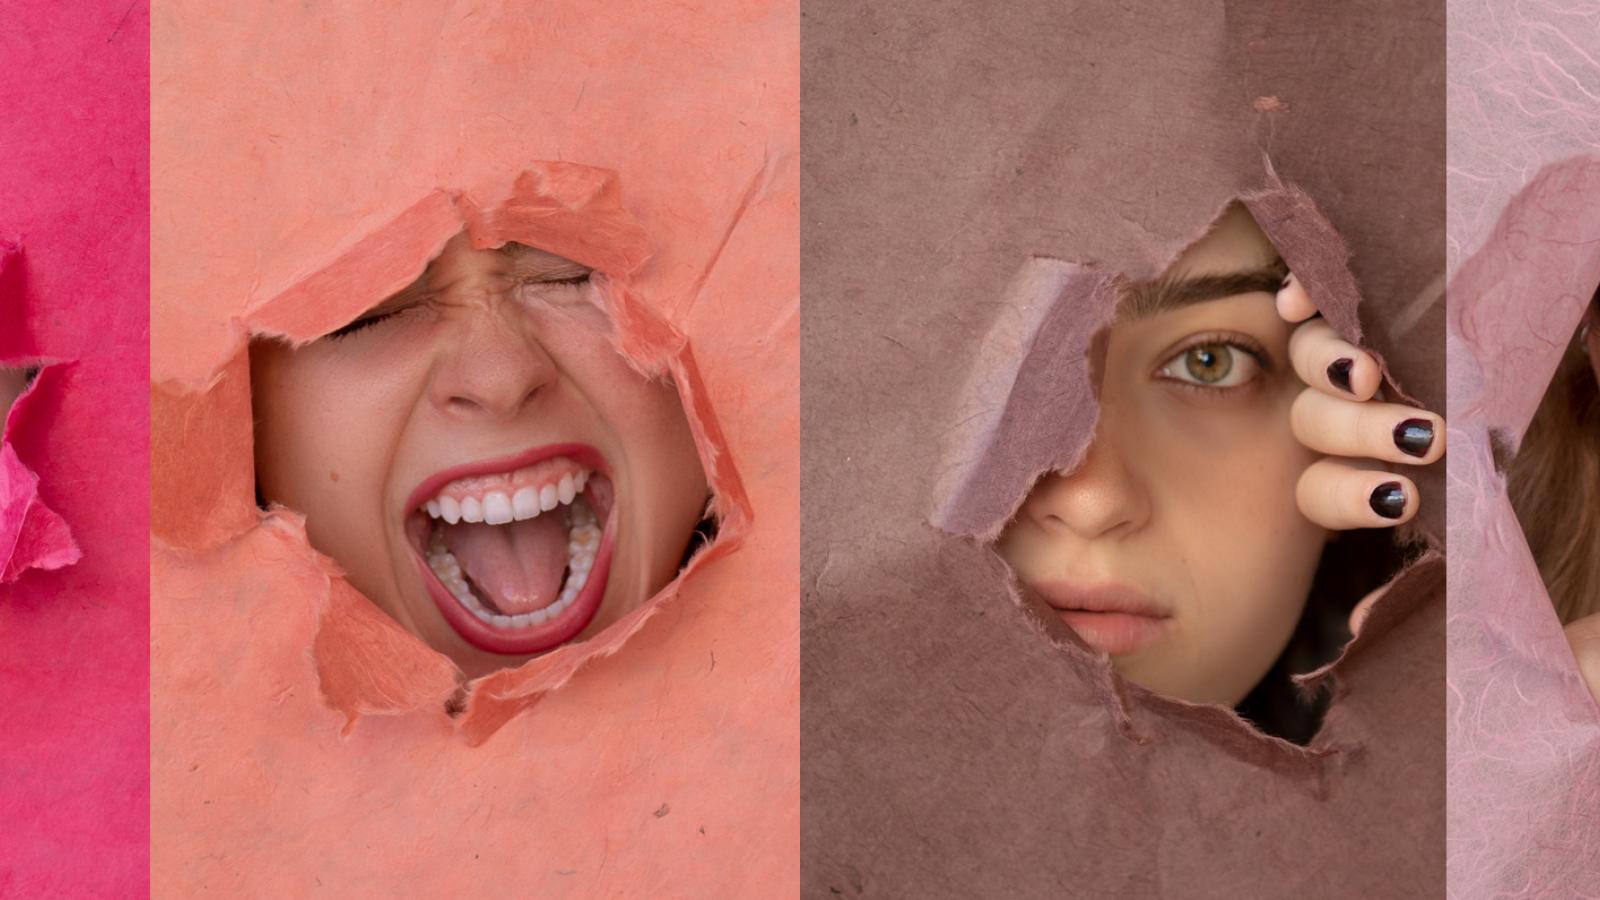 Four pink and brown blocks with female heads revealed in a hole in the paper.